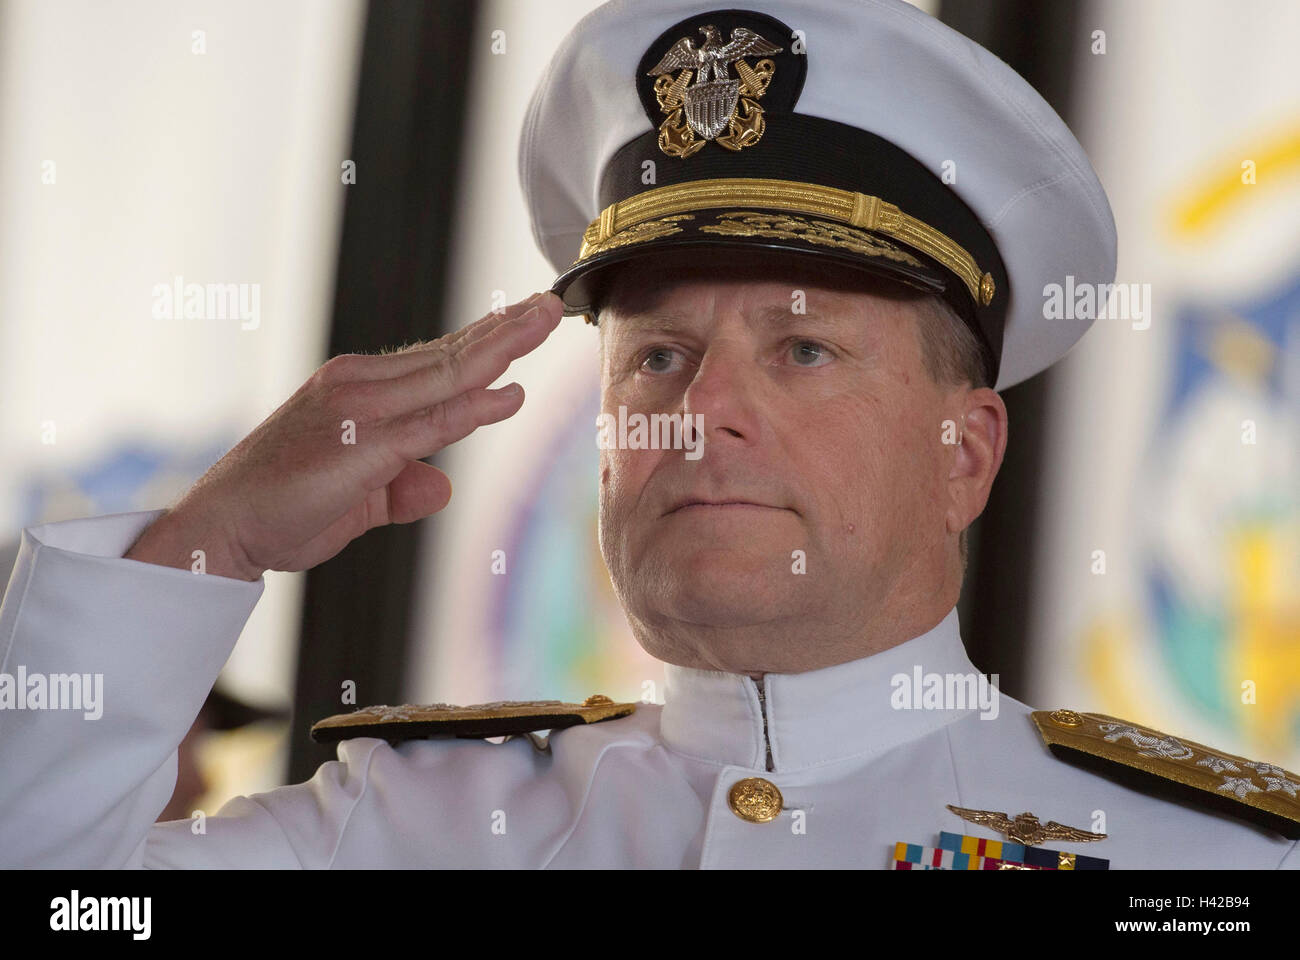 U.S. Northern and NORAD Commander Bill Gortney renders honors as he is piped aboard during the change of command ceremony at the Peterson Air Force Base May 13, 2016 in Colorado Springs, Colorado. Stock Photo